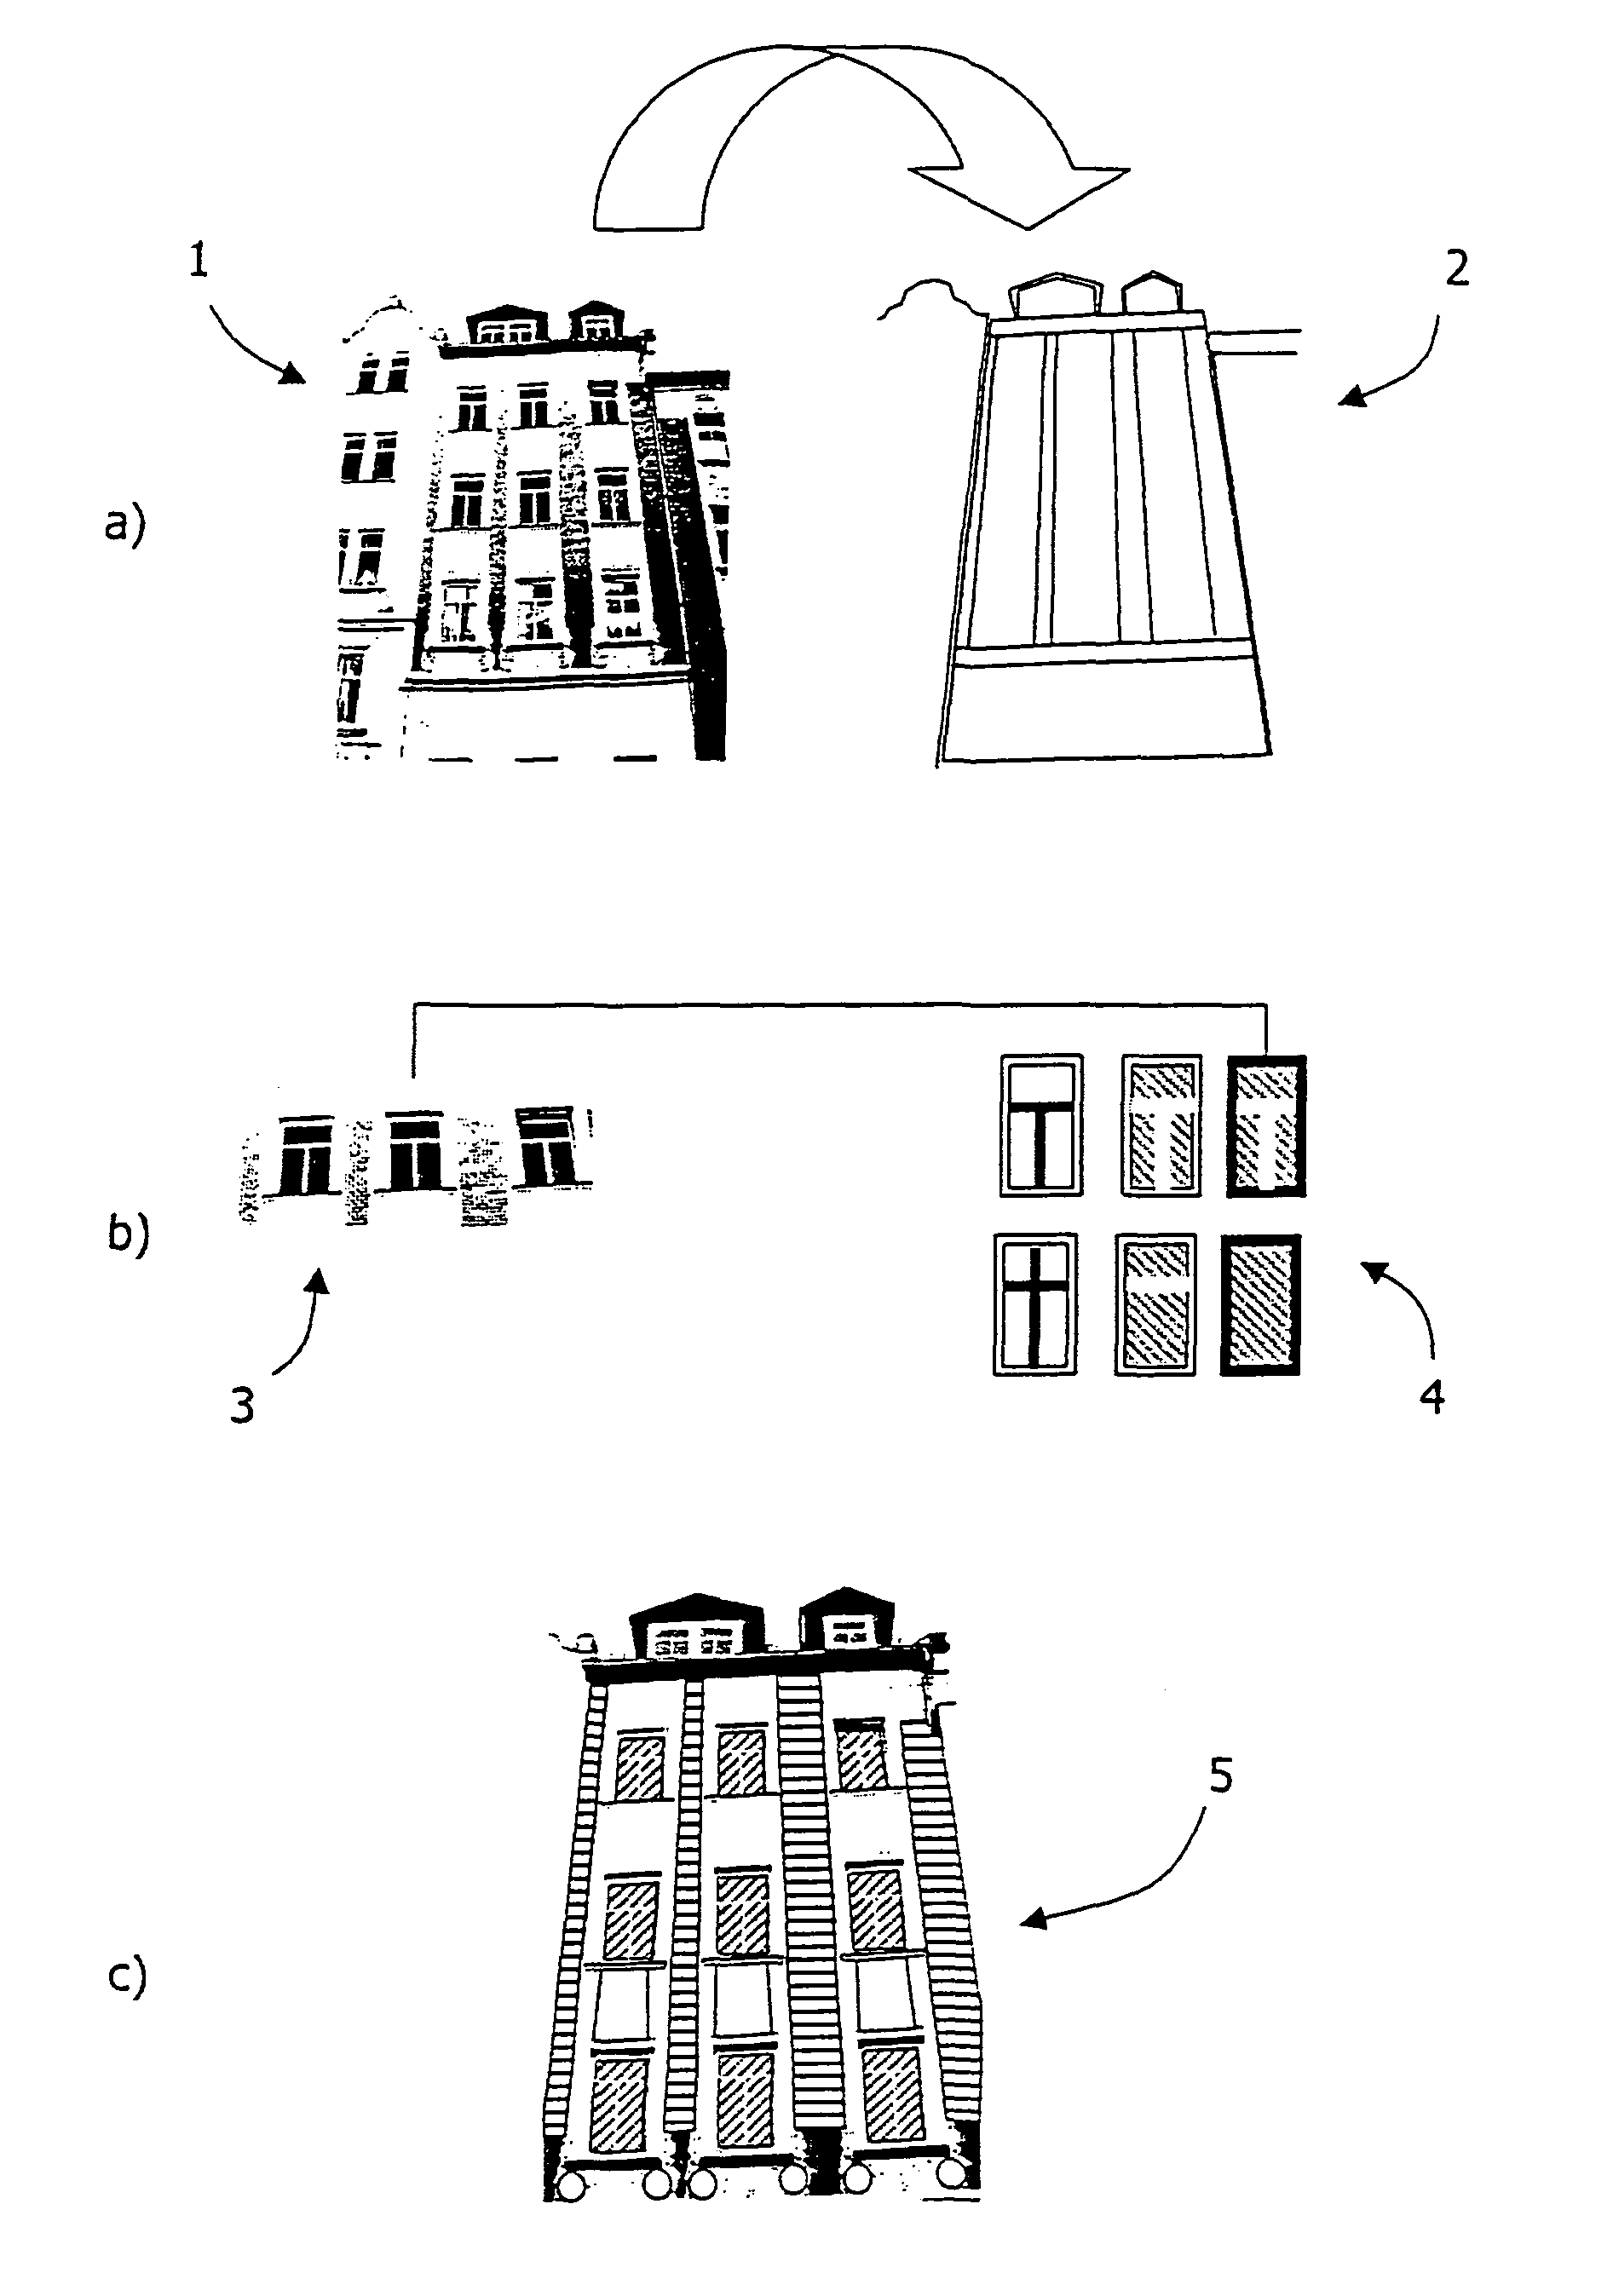 Method for texturizing virtual three-dimensional objects